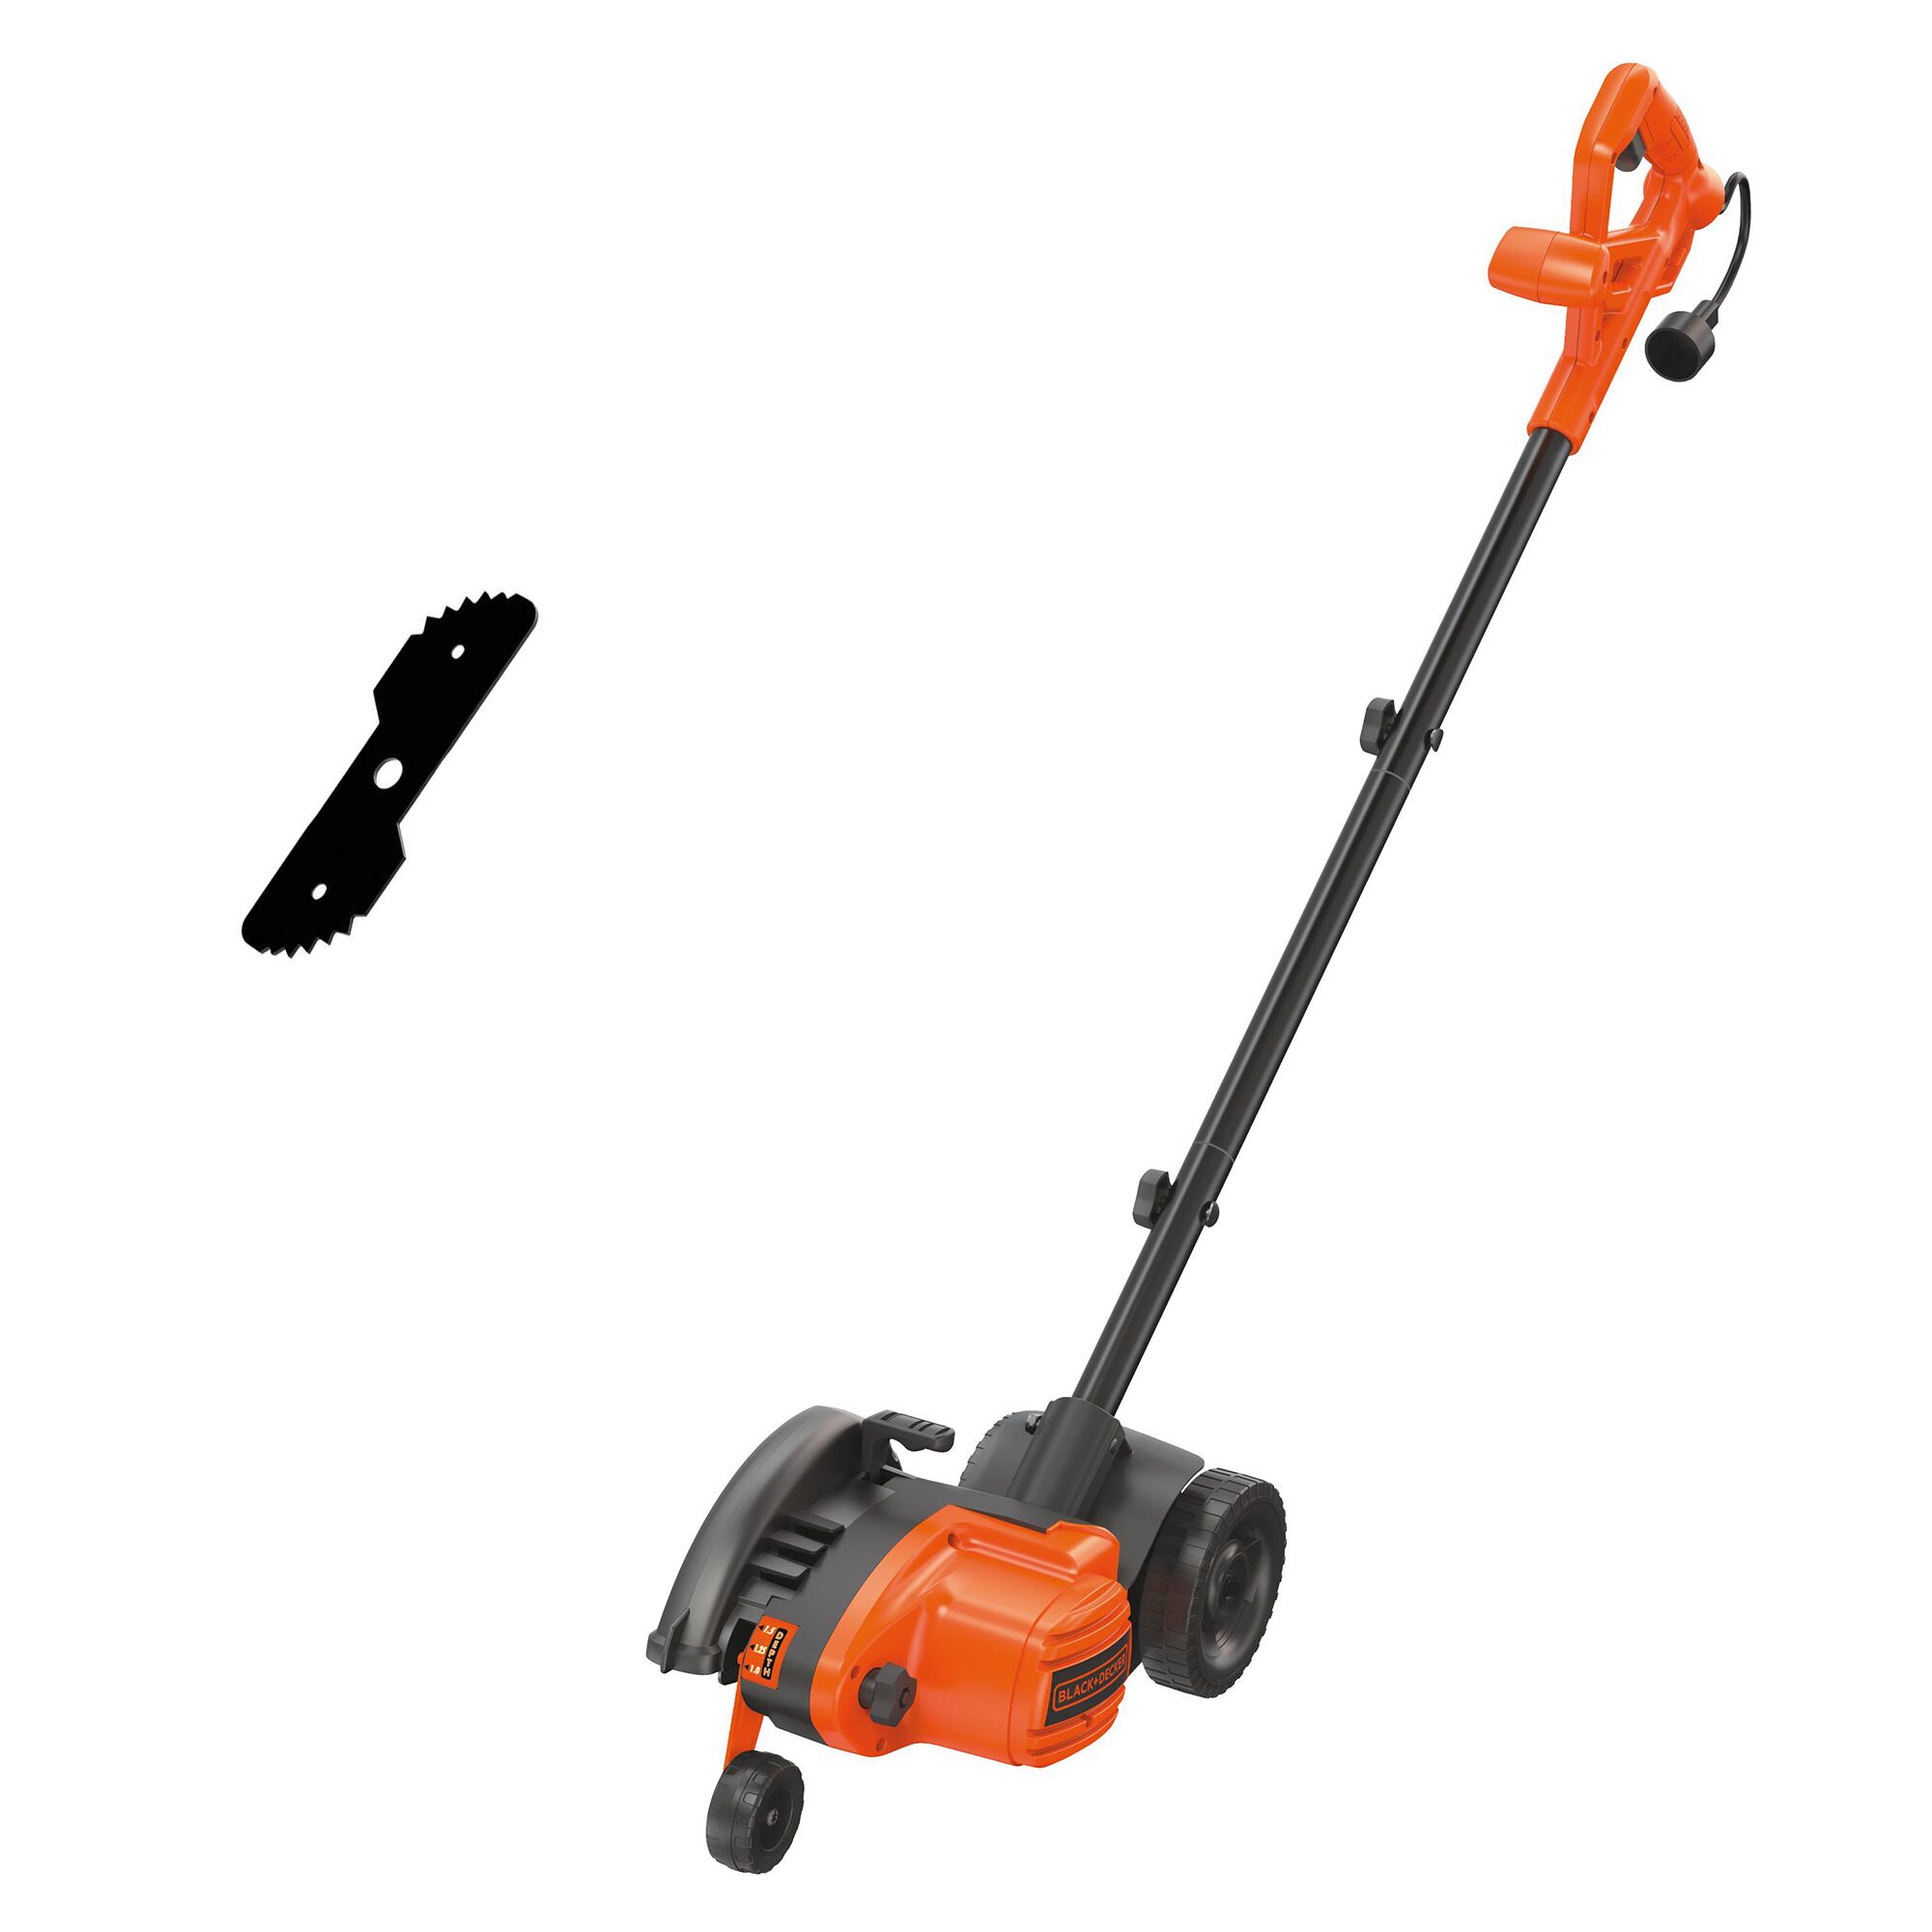 2-in-1 String Trimmer / Edger and Trencher